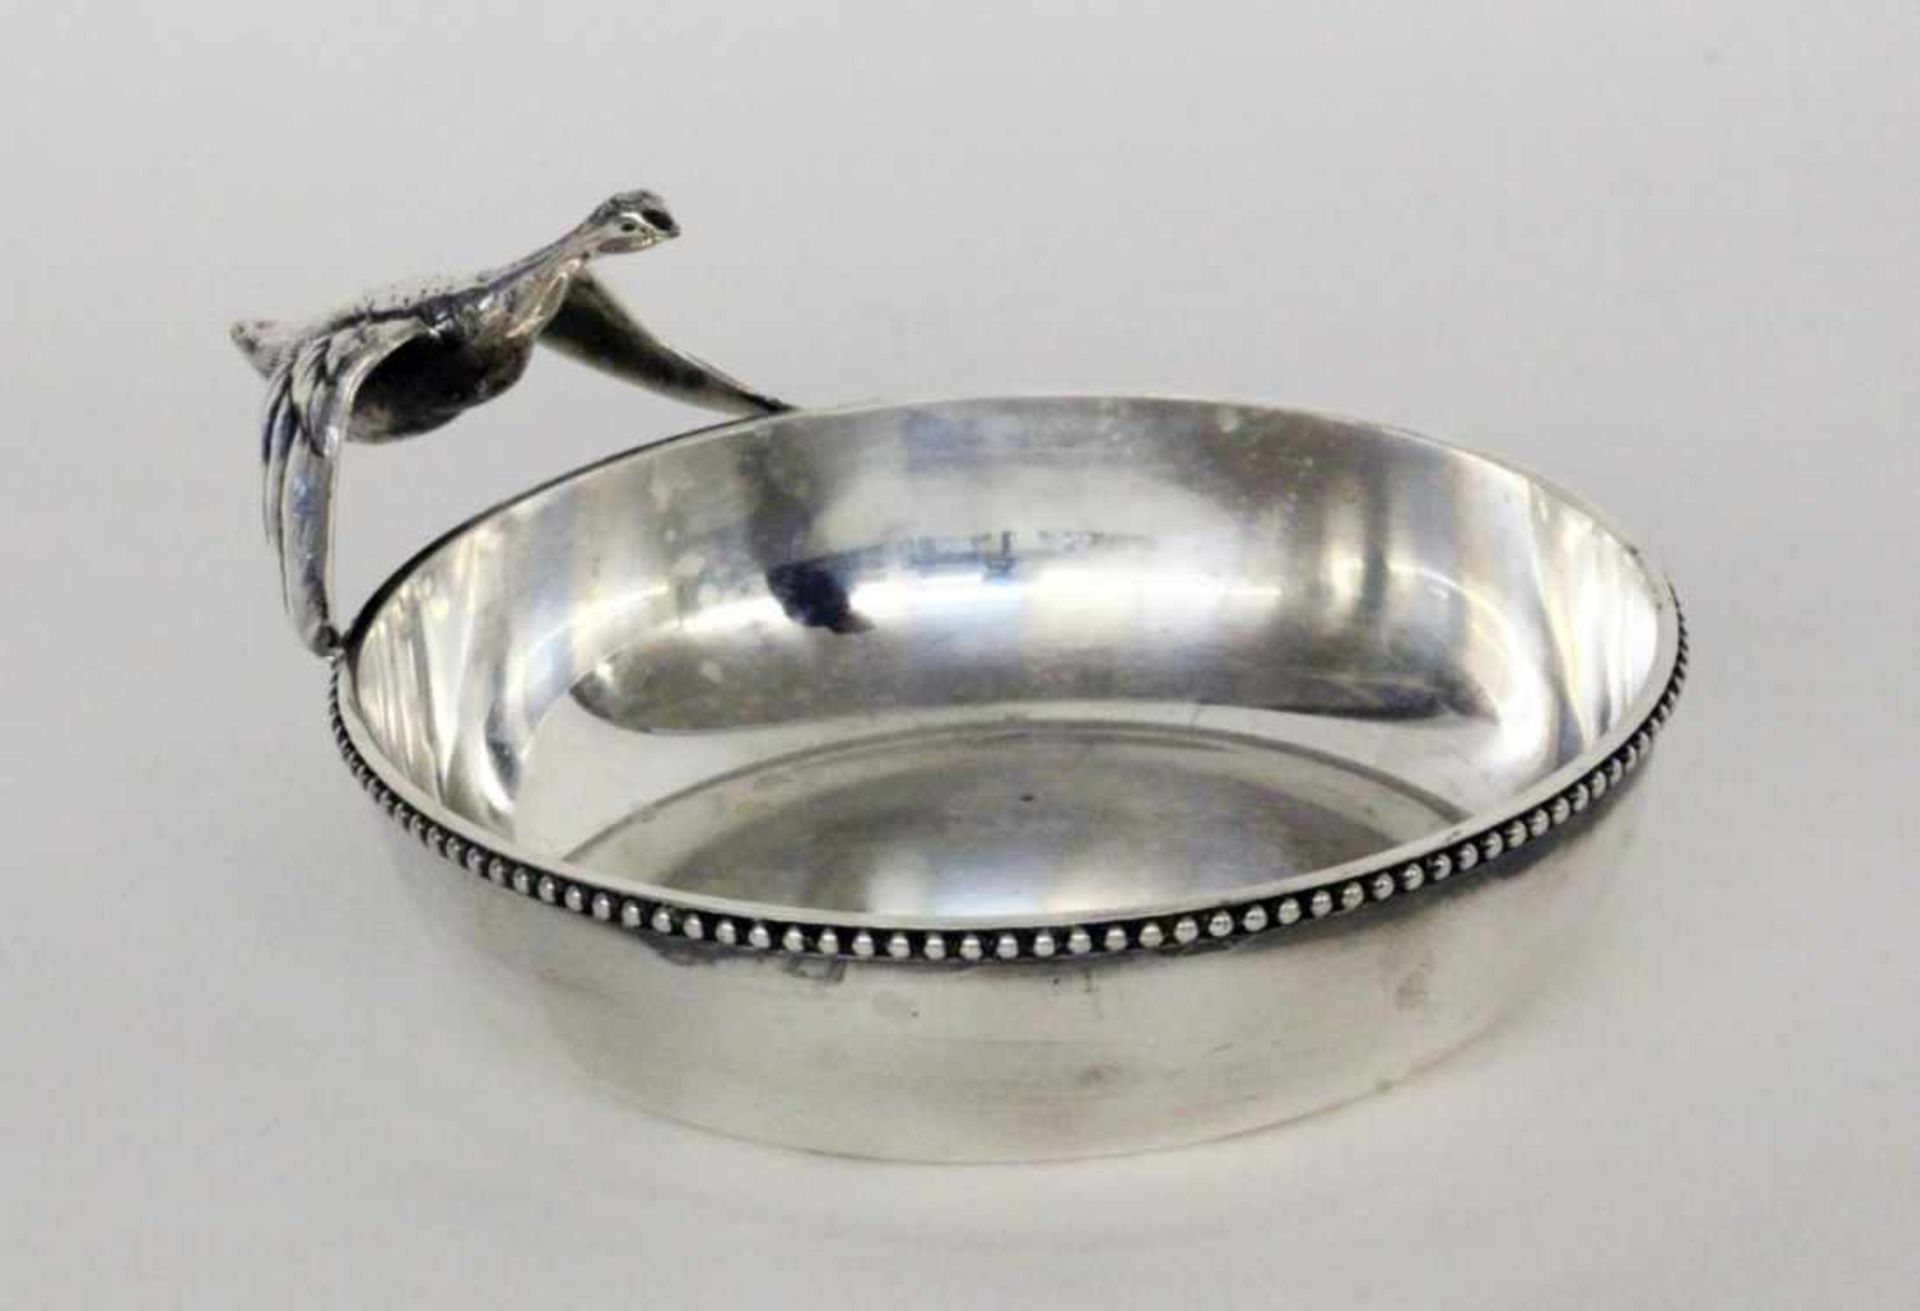 A SWEET BOWL Orfevrerie Beard, Montreux Silver-plated metal. Handle in the form of aflying bird.